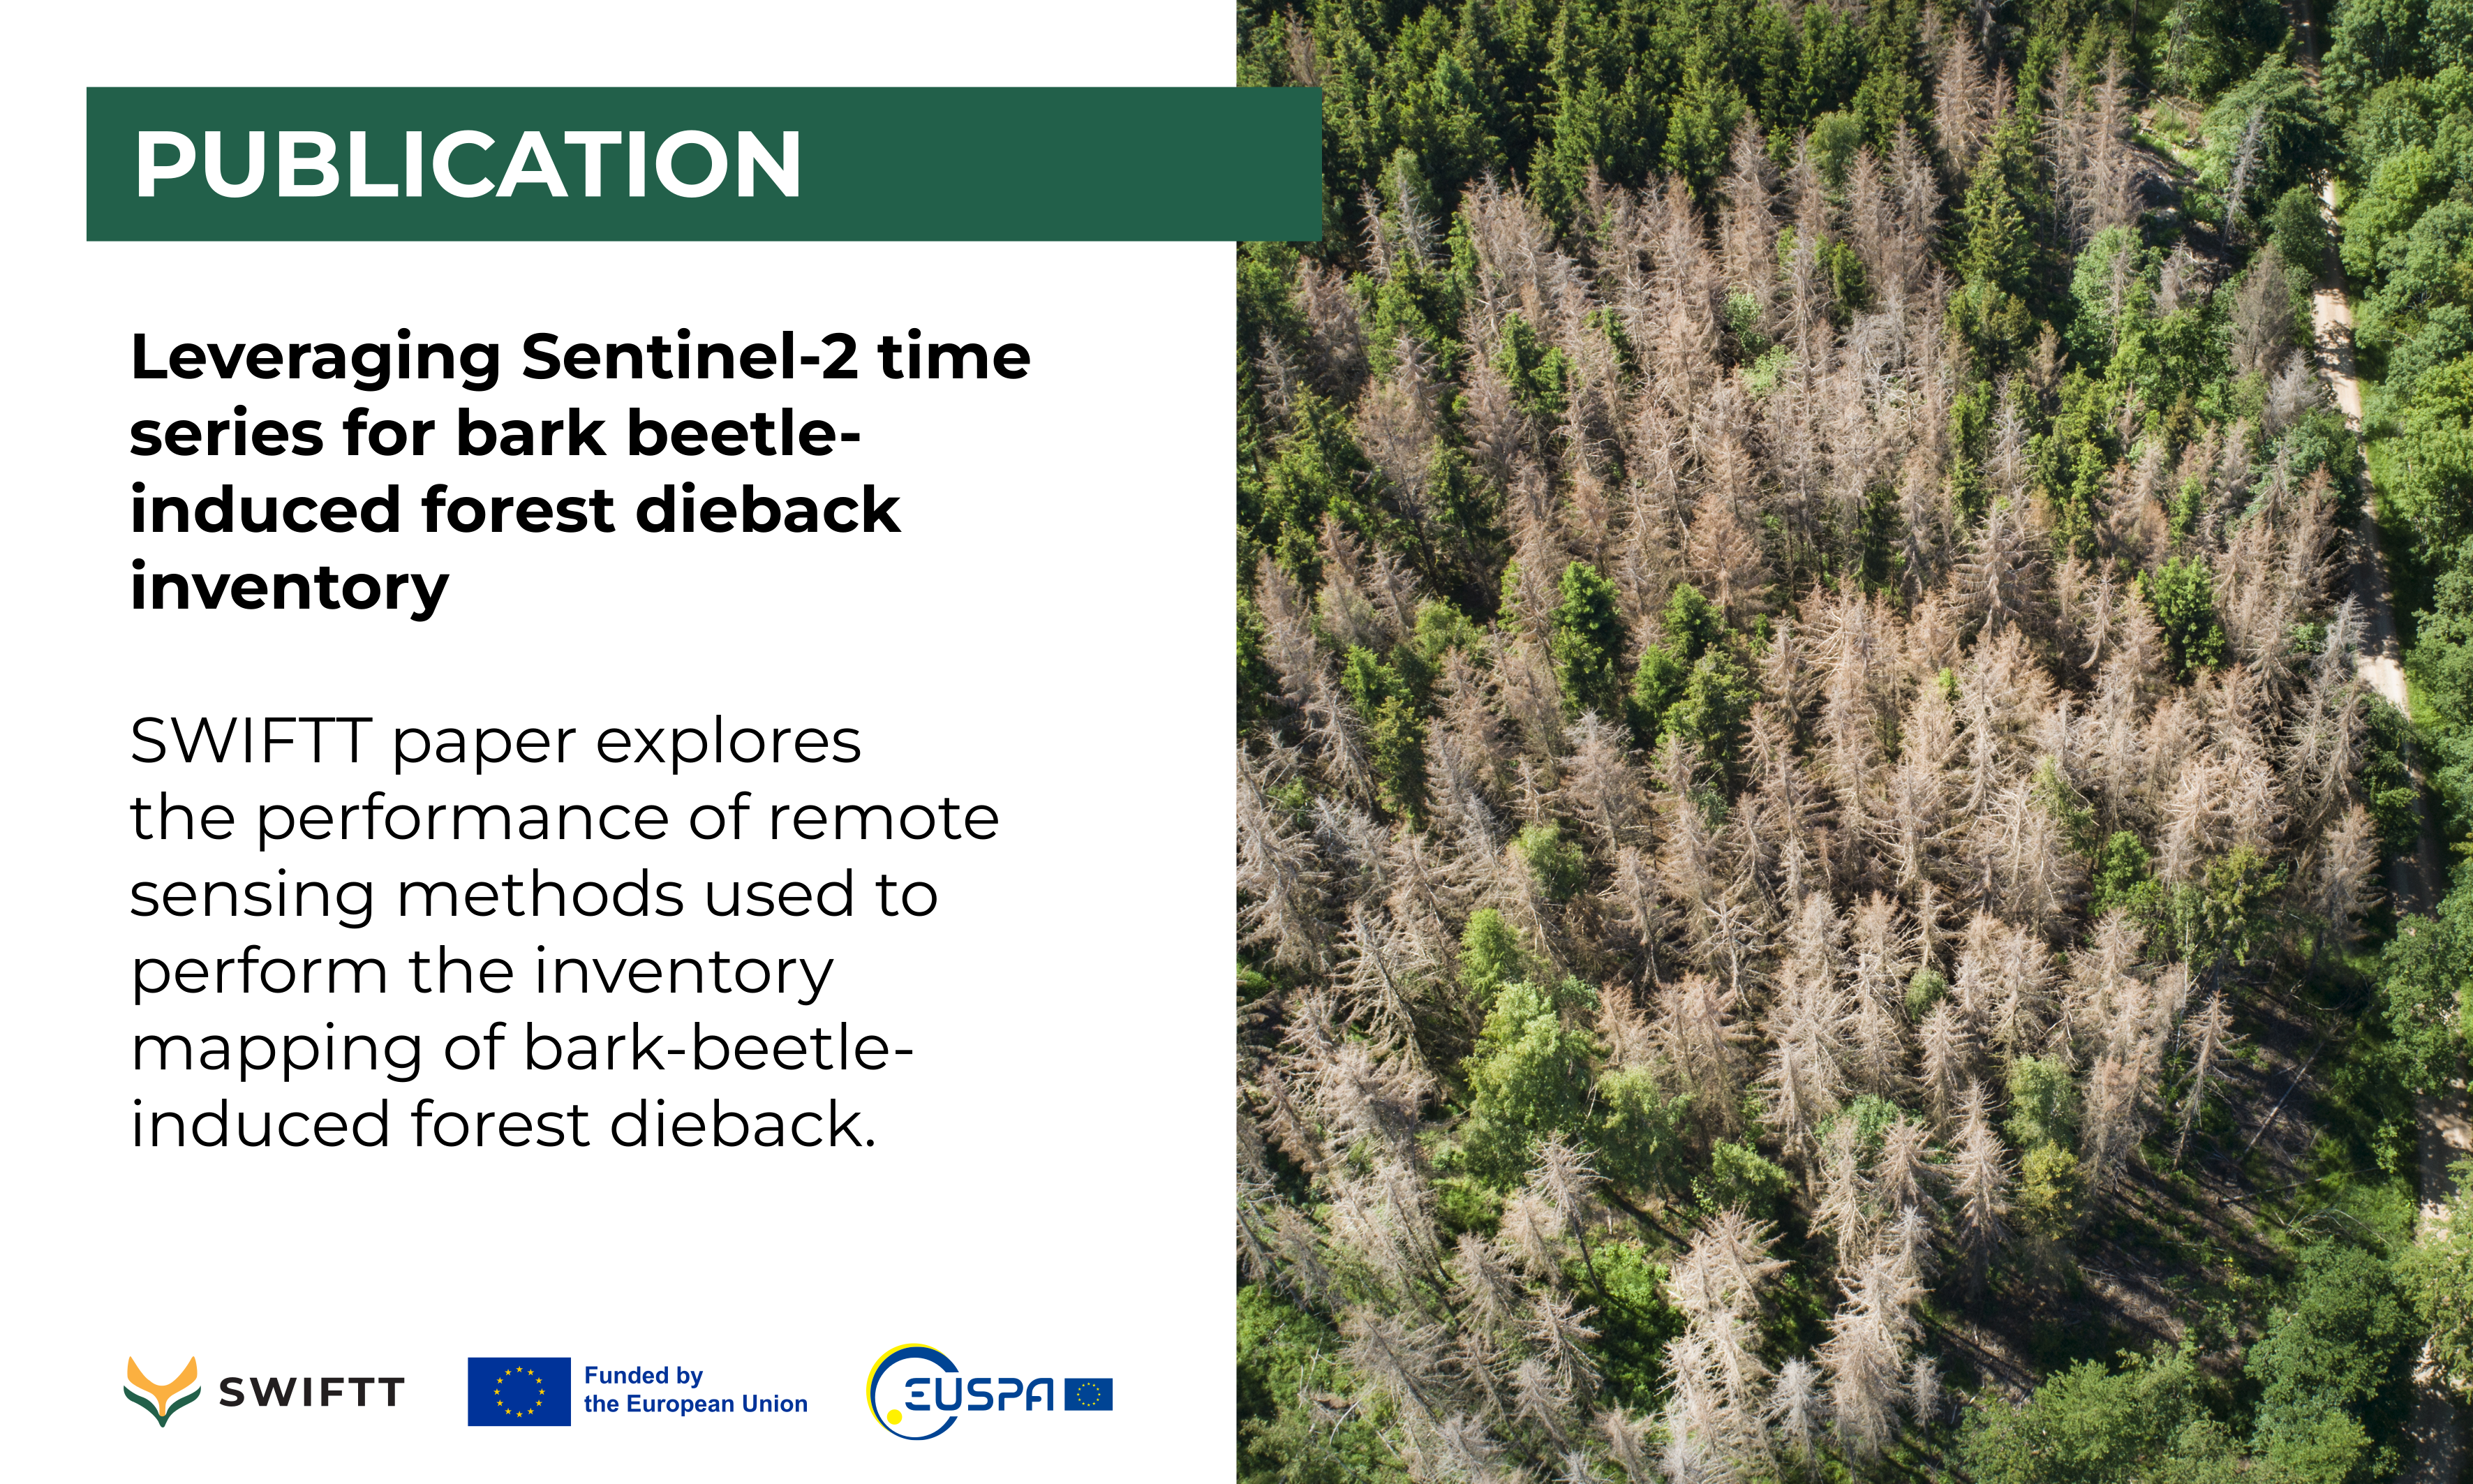 Publication: Leveraging Sentinel-2 time series for bark beetle-induced forest dieback inventory 